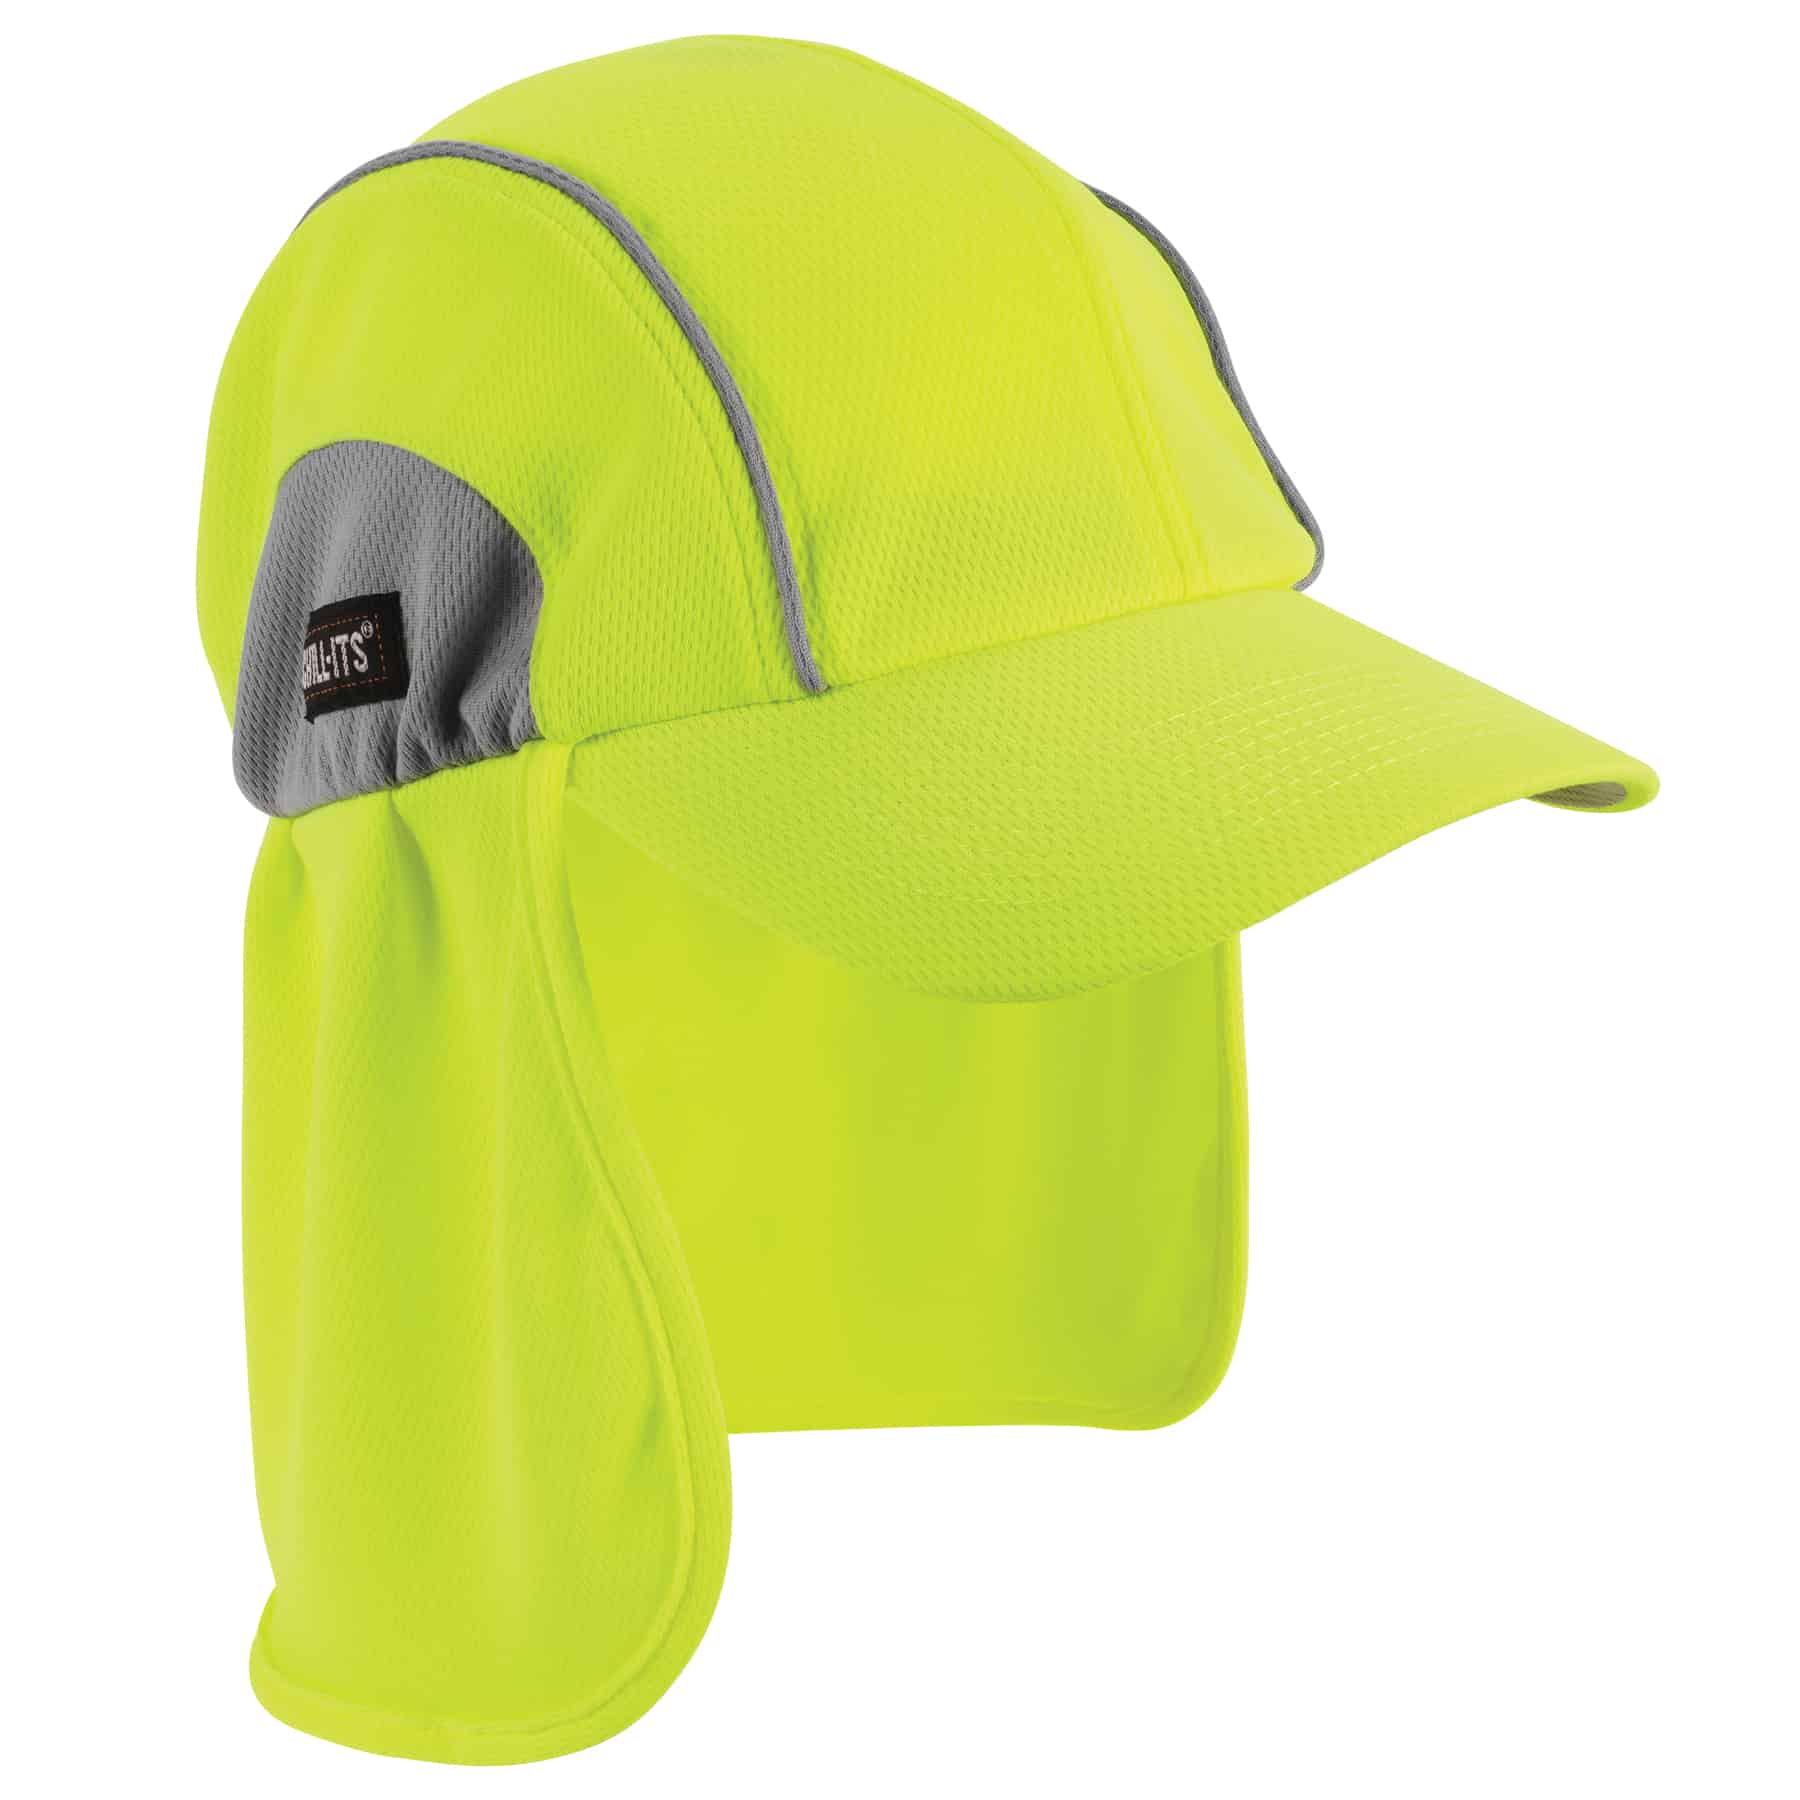 Outdoor Safety Hat Neck Shield For working Breathable One Size Sun Shade